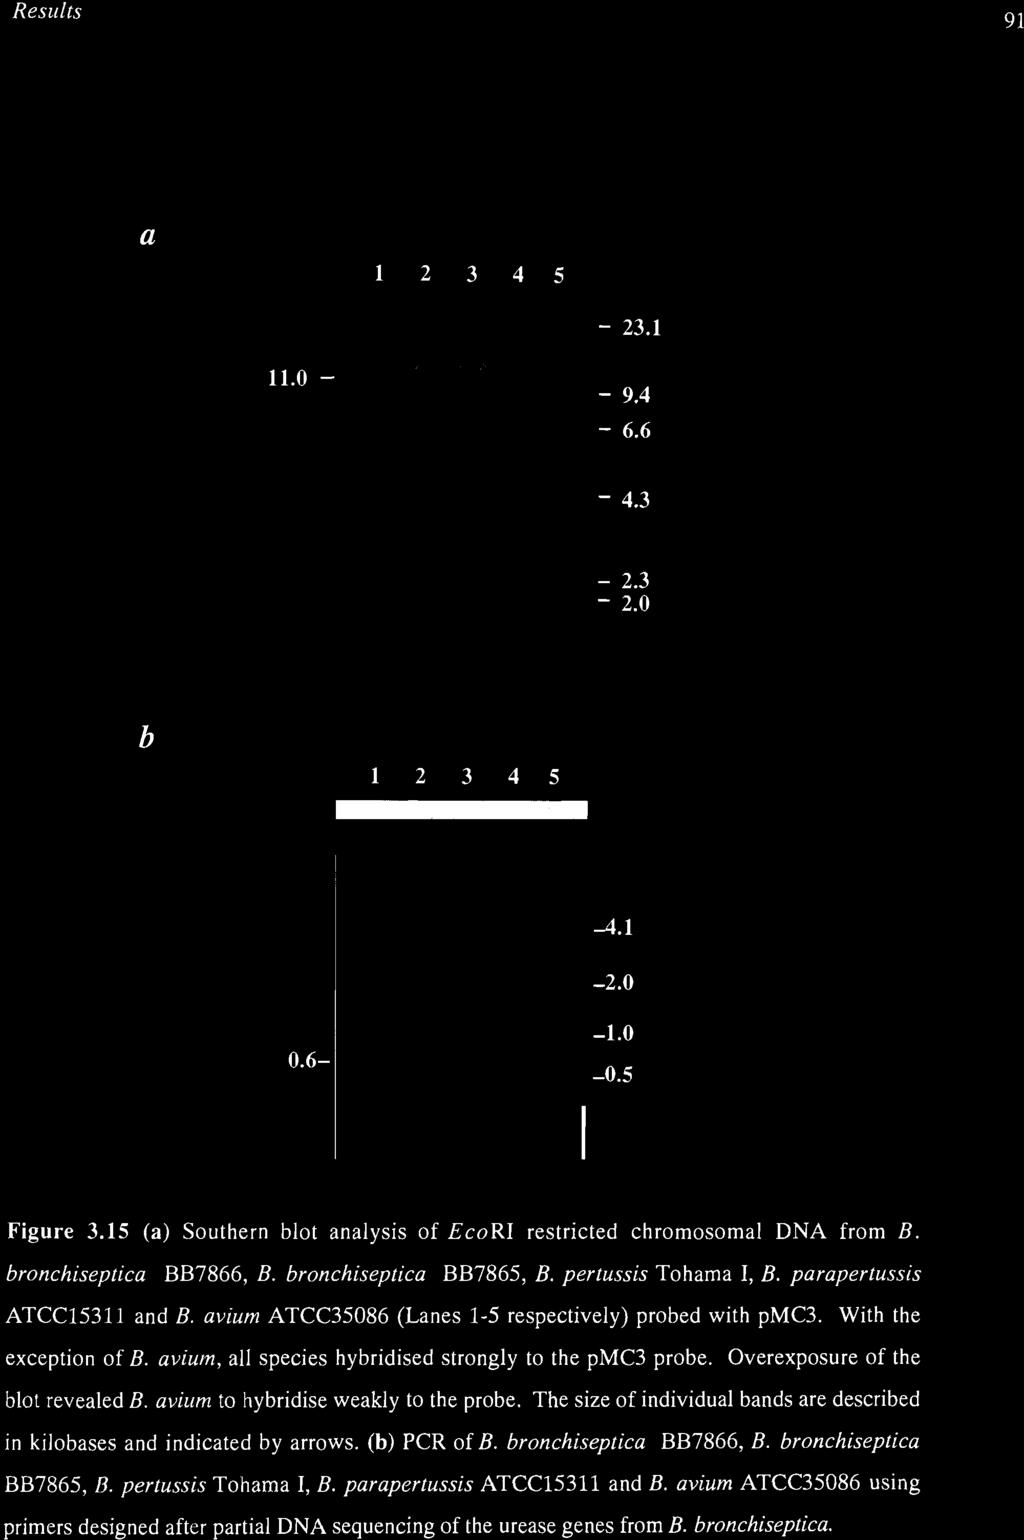 The size of individual bands are described in kilobases and indicated by arrows, (b) PCR of B. bronchiseptica BB7866, B.